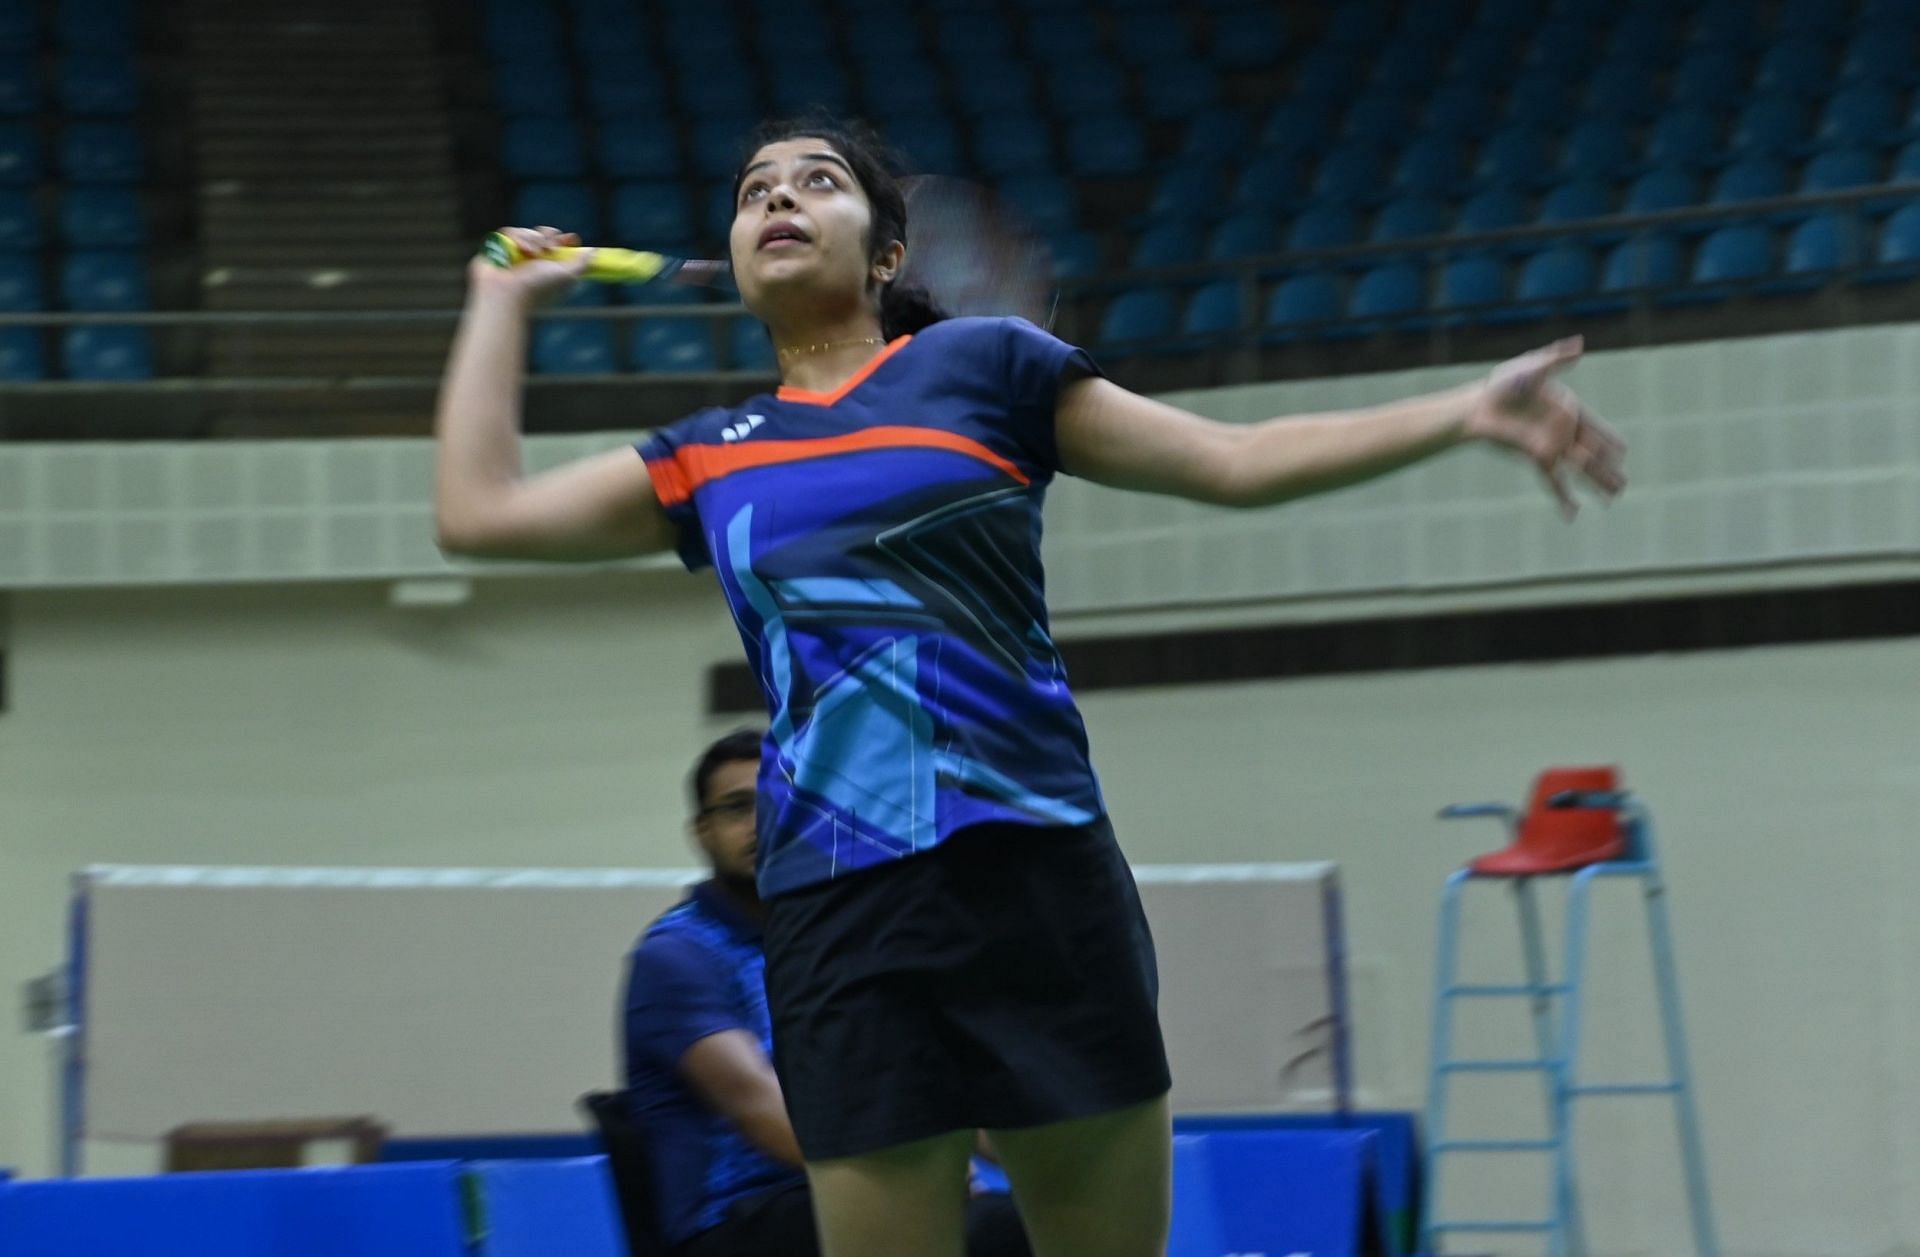 World No. 57 Aakarshi Kashyap has taken a break from participating in international tournaments to concentrate on Commonwealth Games. (Pic credit: BAI)